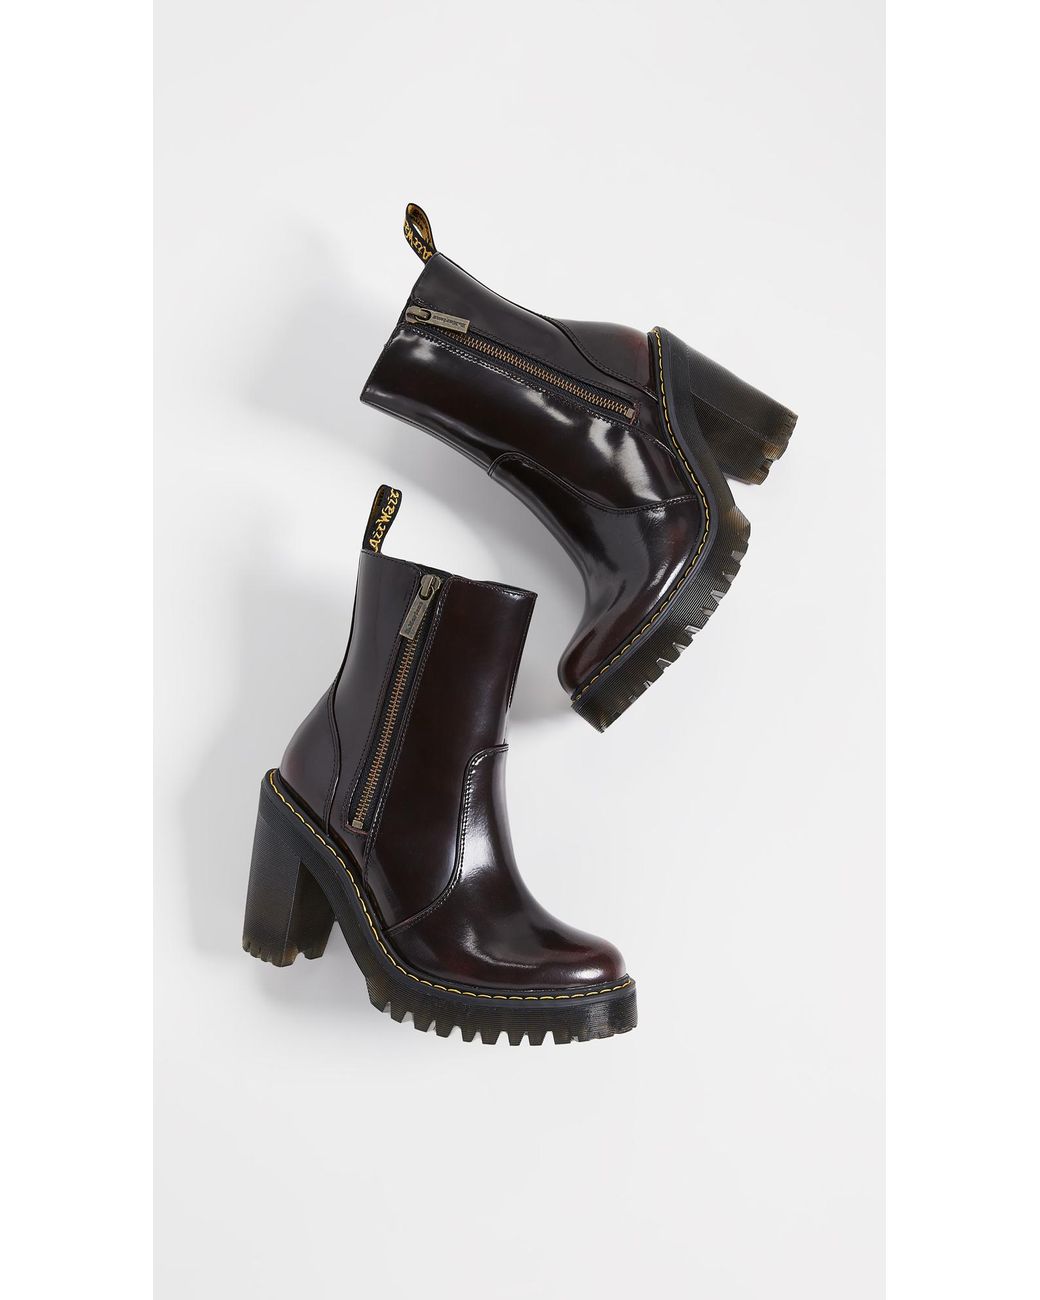 Dr. Martens Leather Magdalena Ii Ankle Boots in Cherry Red (Black) | Lyst